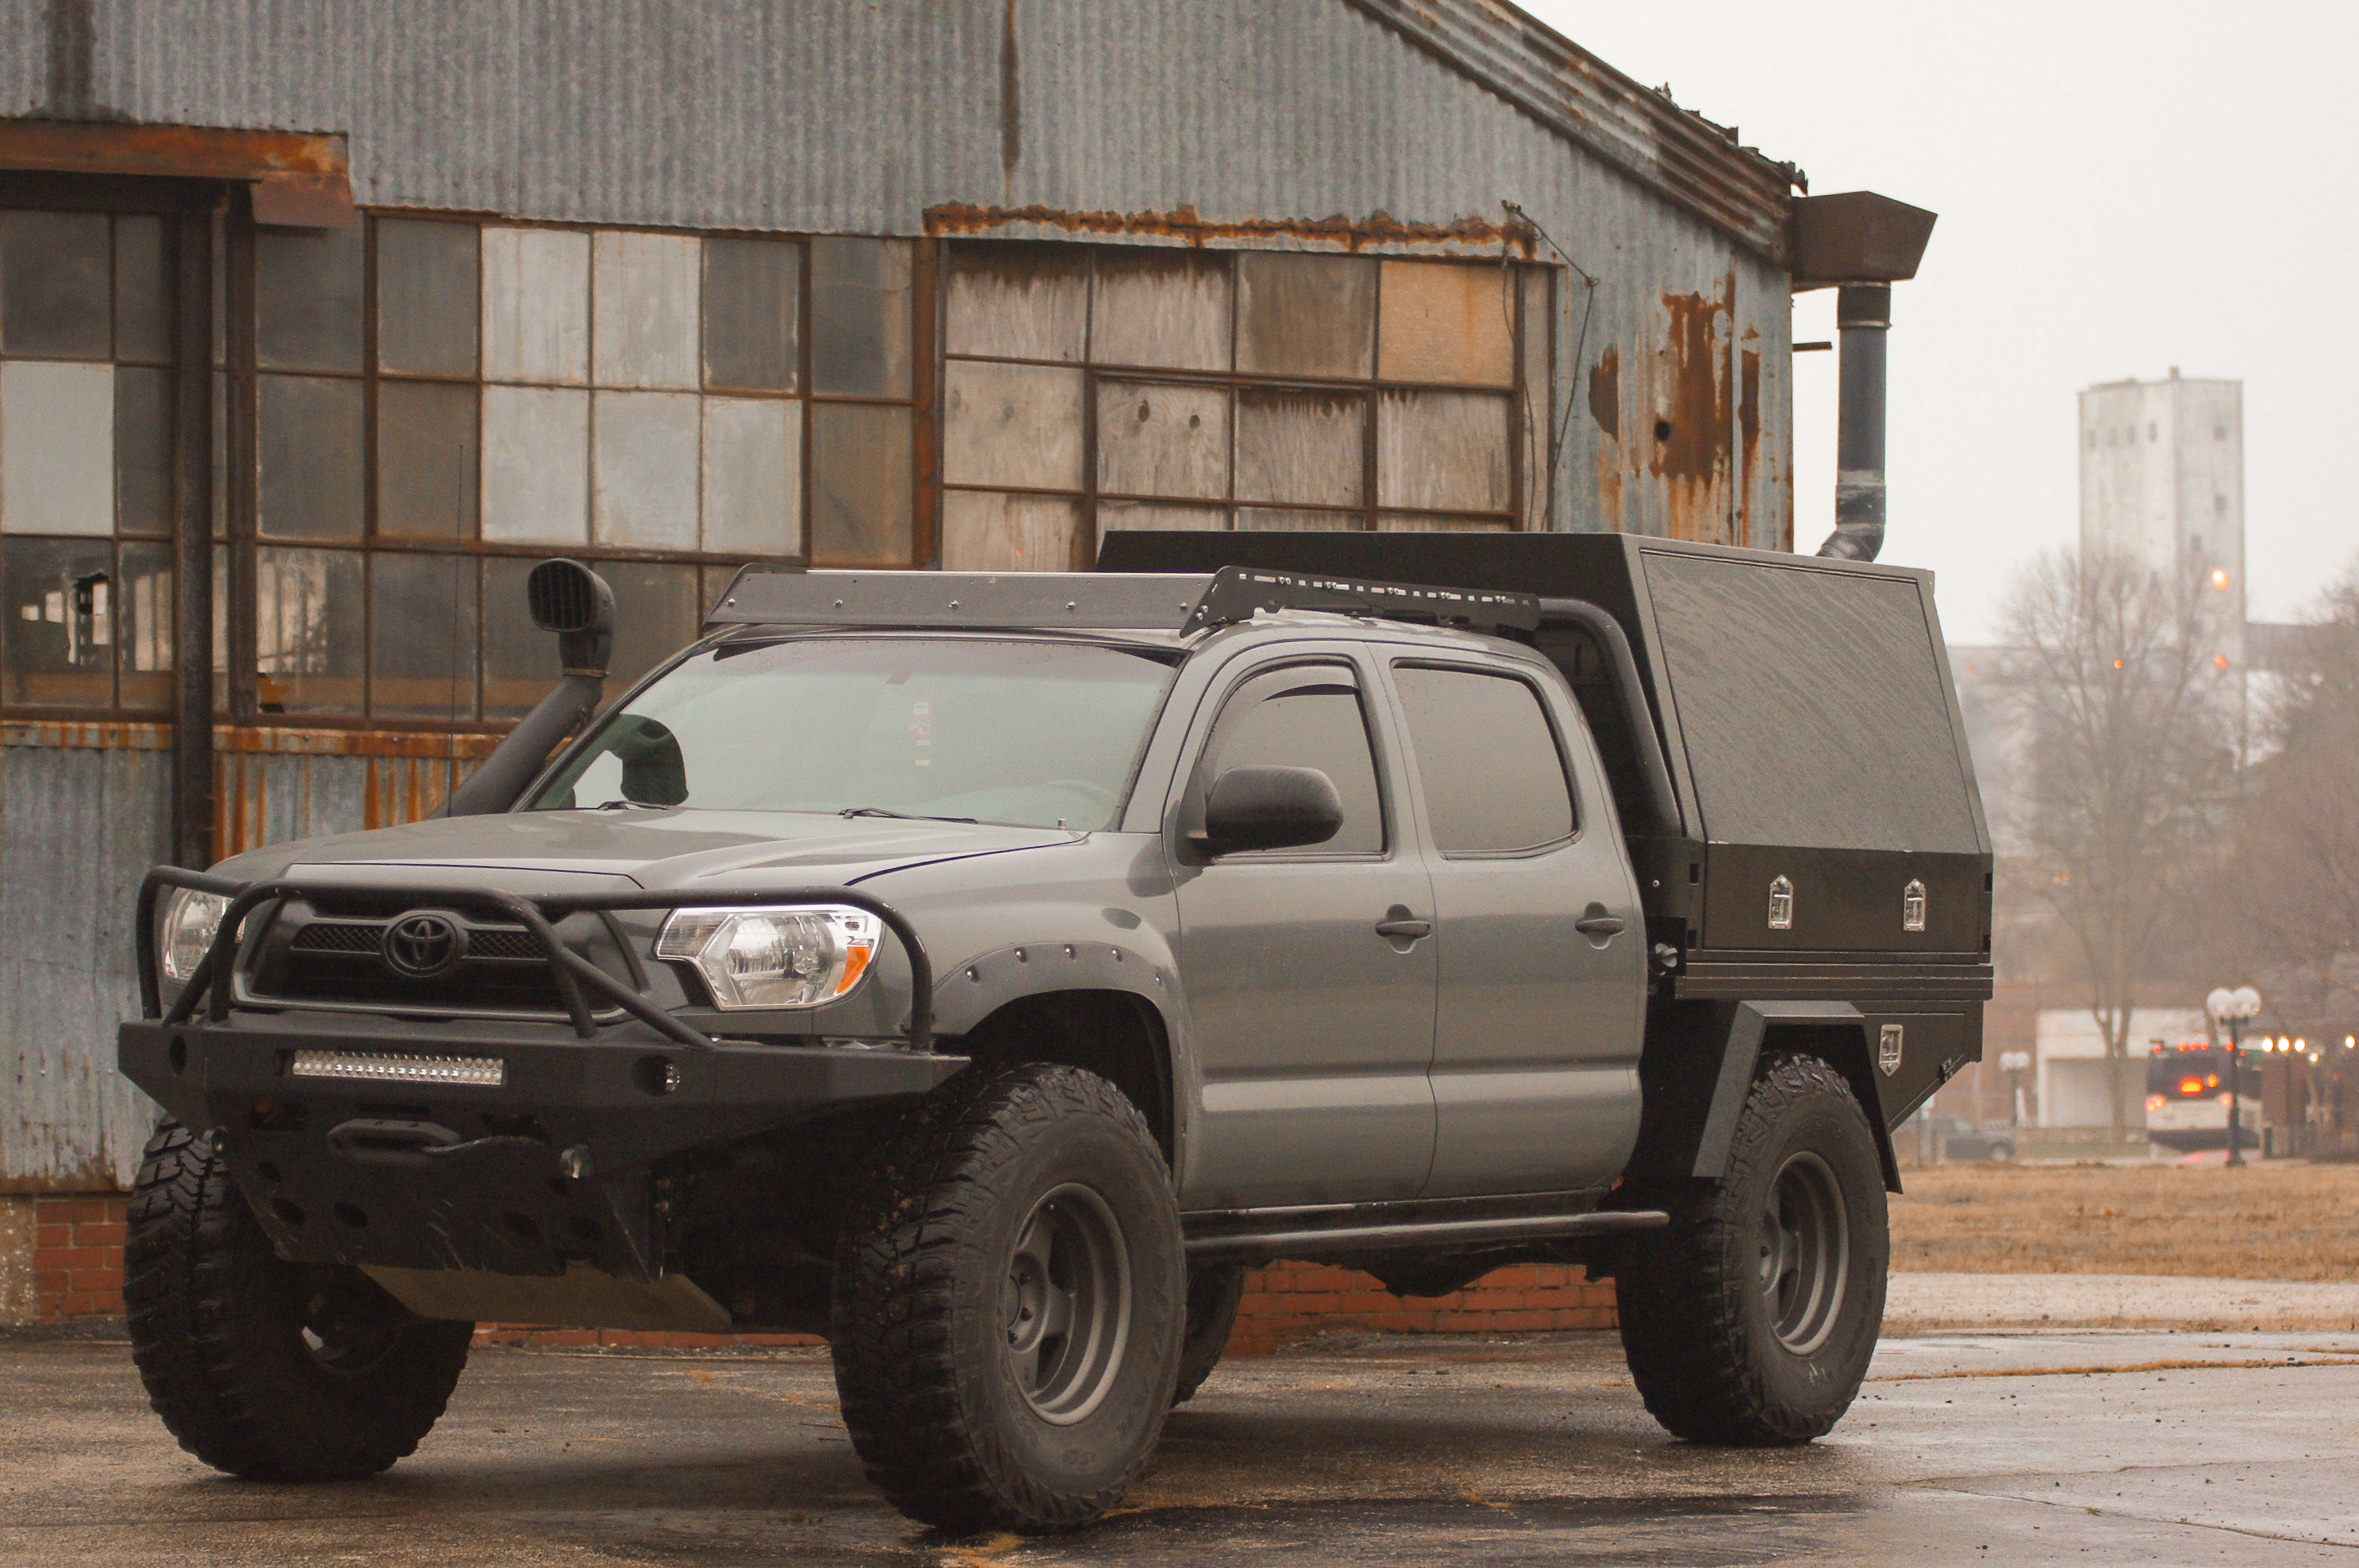 The Ultimate Toyota Tacoma | Chandler Coe — Overland Kitted